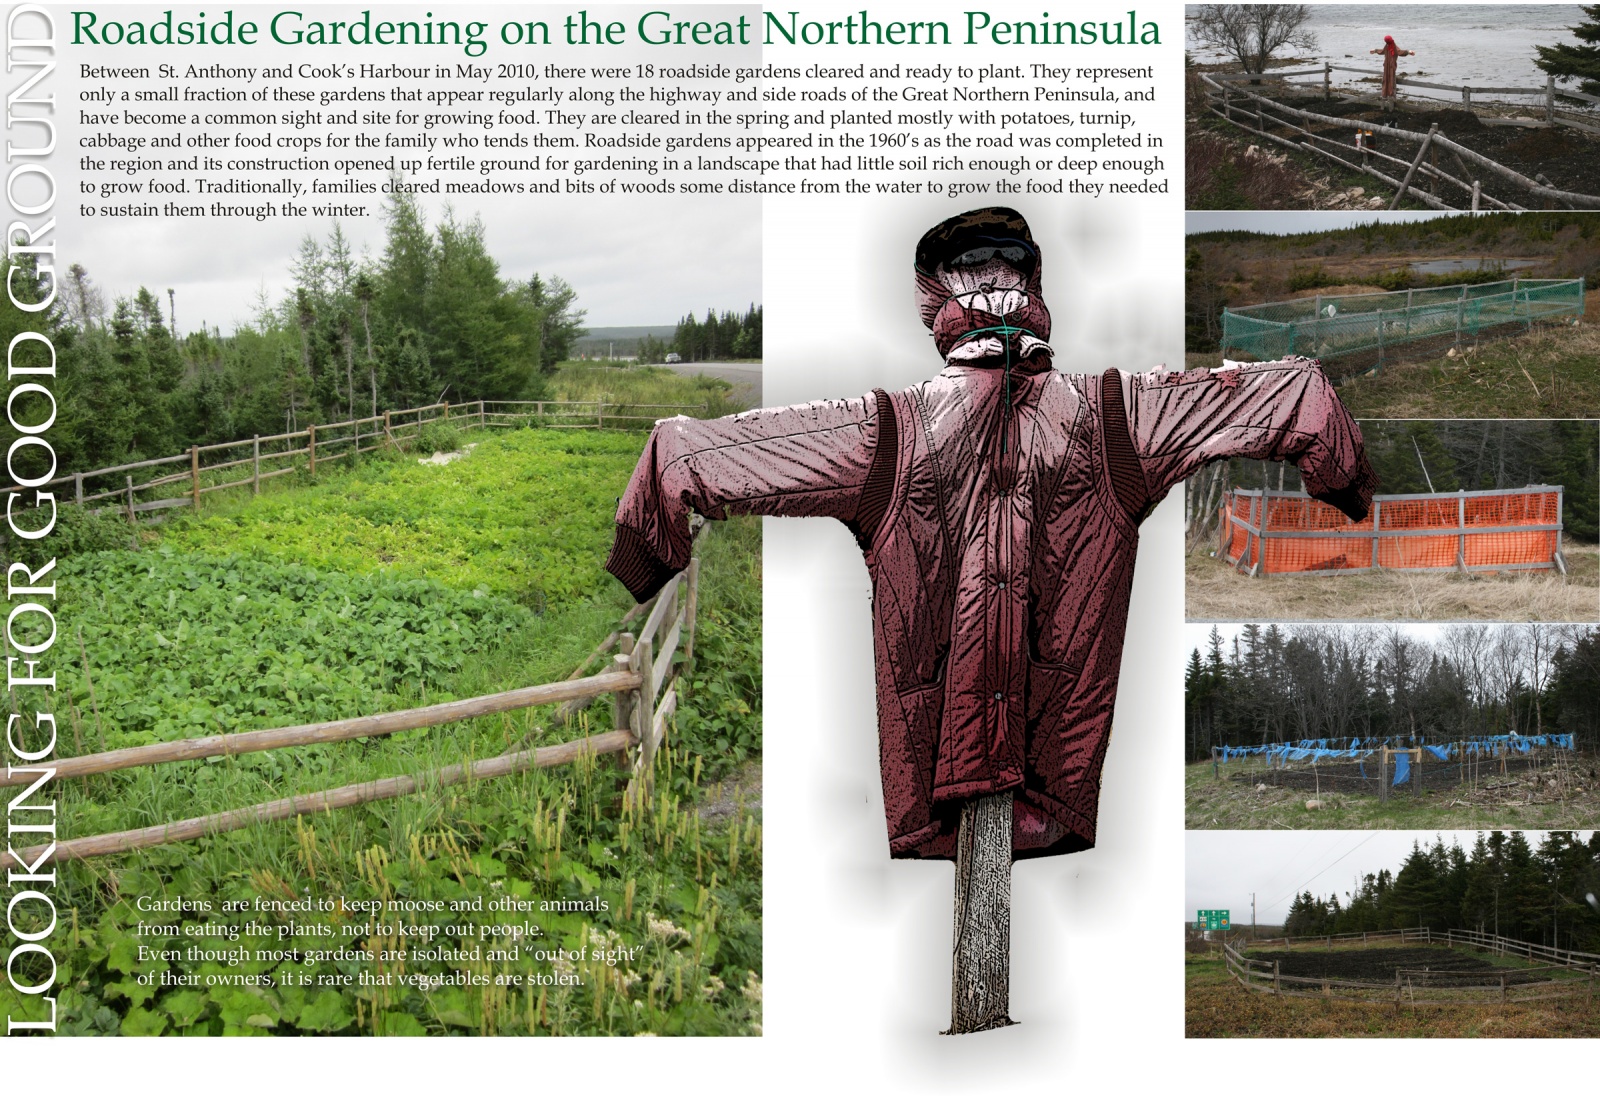 Looking for Good Ground: Roadside Gardening on the Great Northern Peninsula